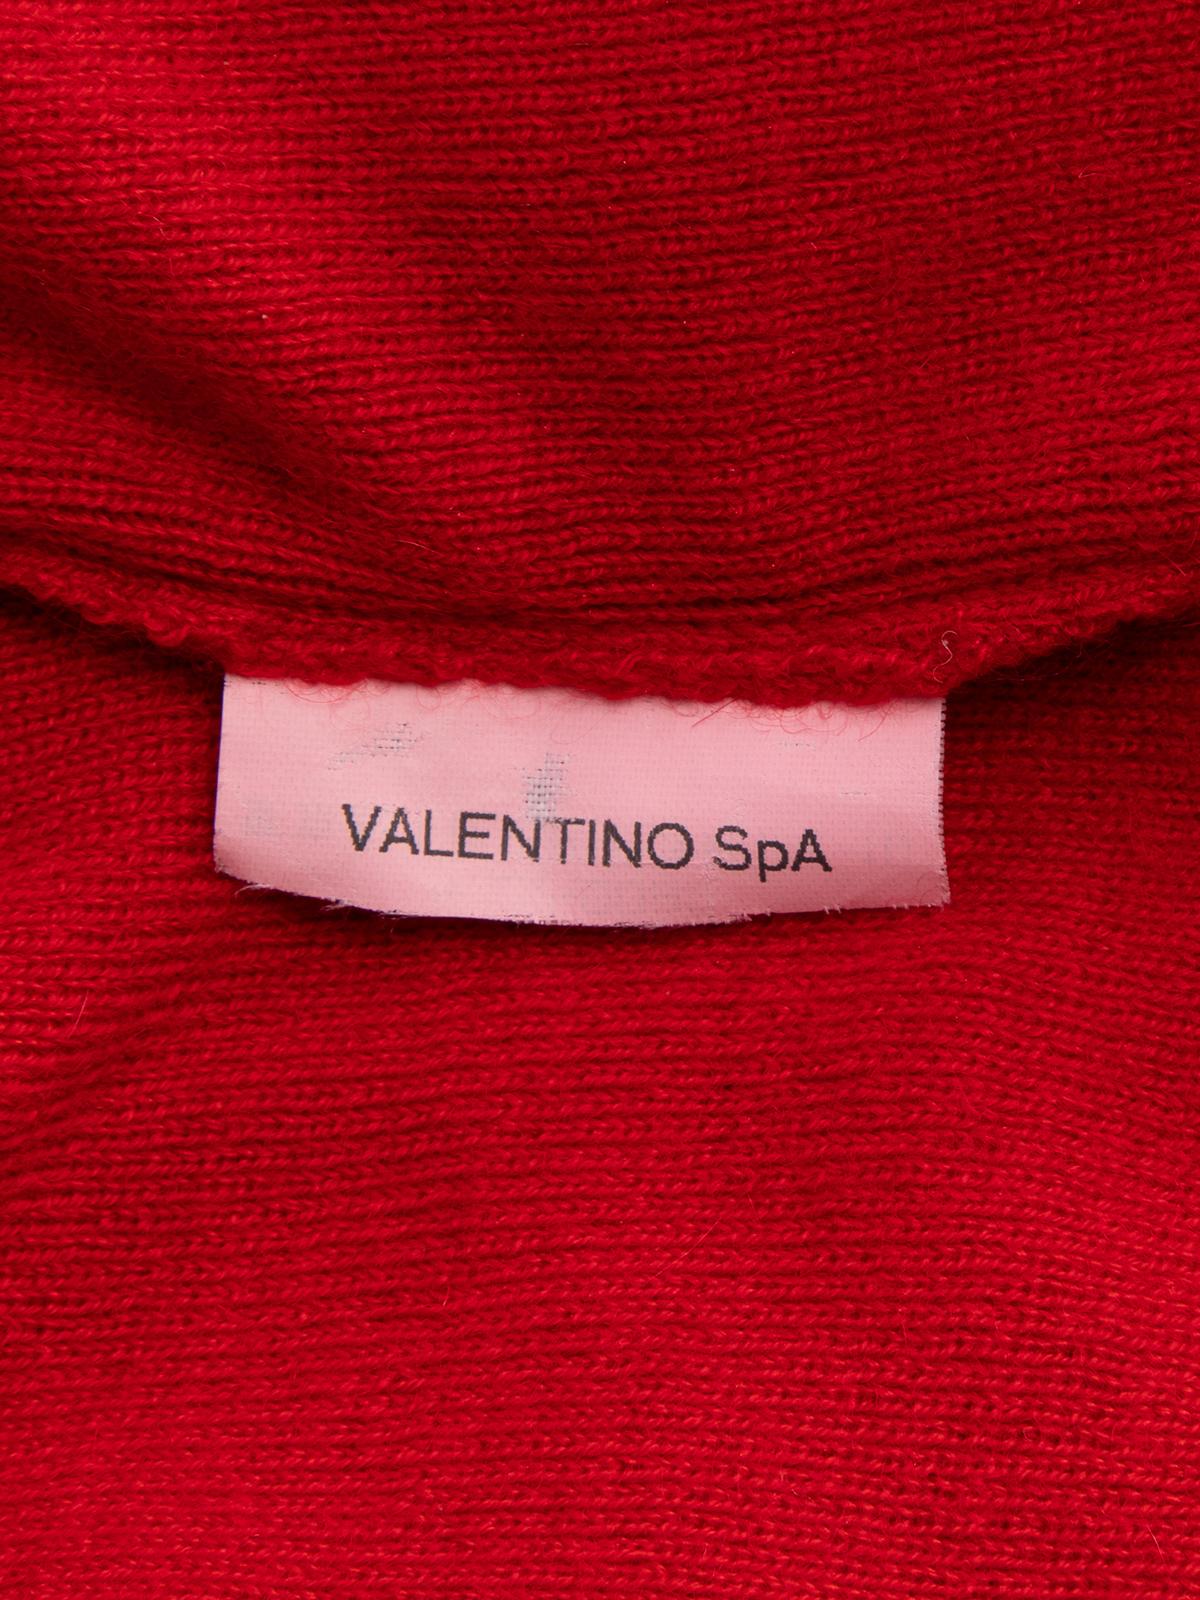 Pre-Loved Valentino Spa Women's Vintage Red Knot Accent Knitted Top 4